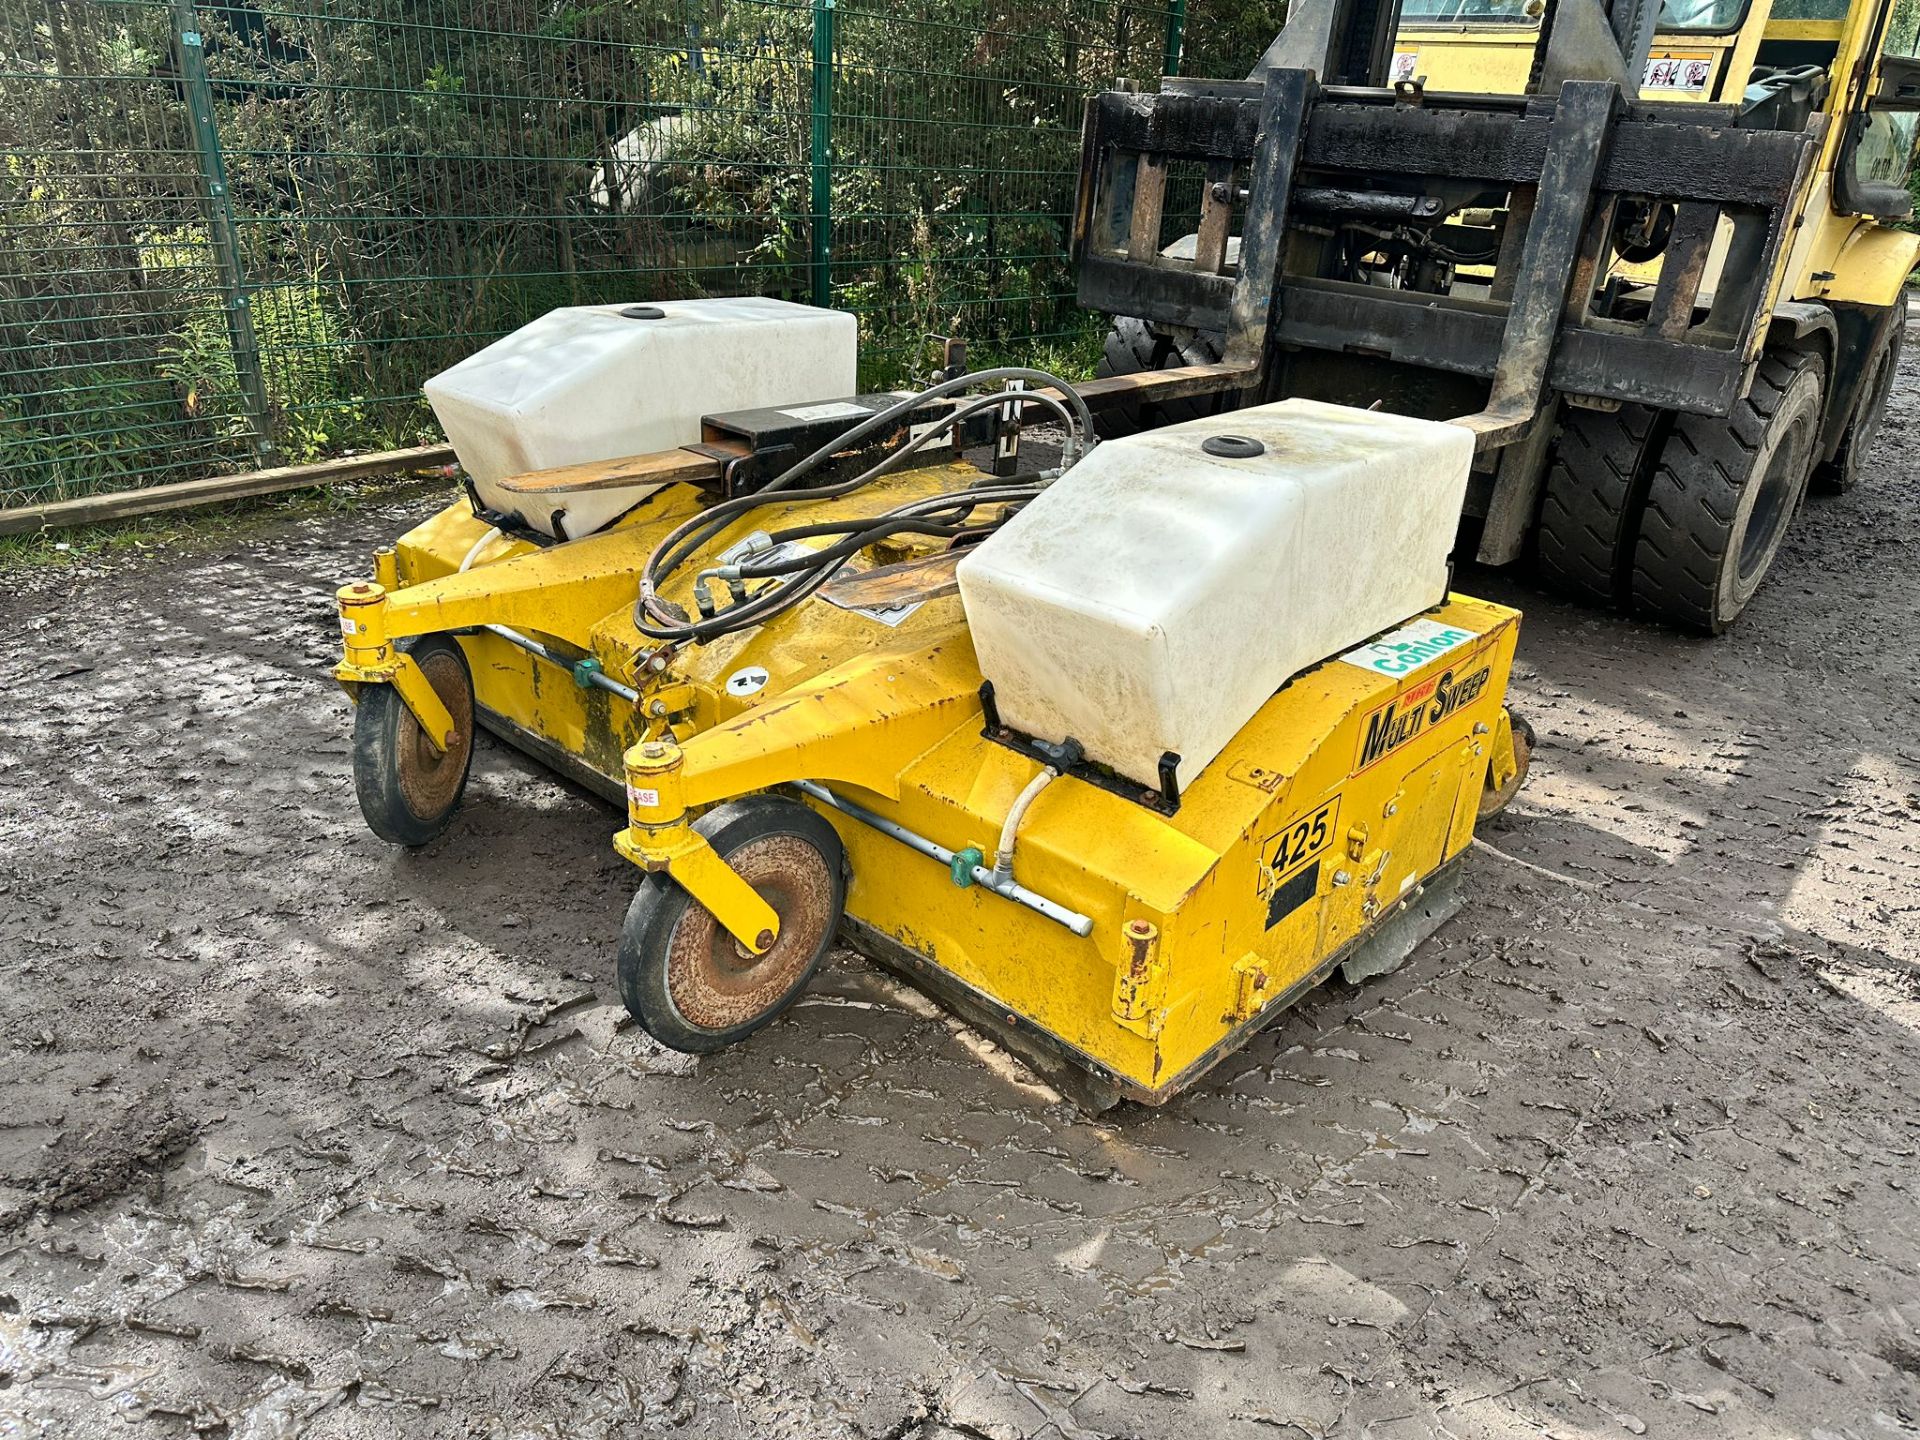 MULTISWEEP 425 SWEEPER COLLECTOR *PLUS VAT*